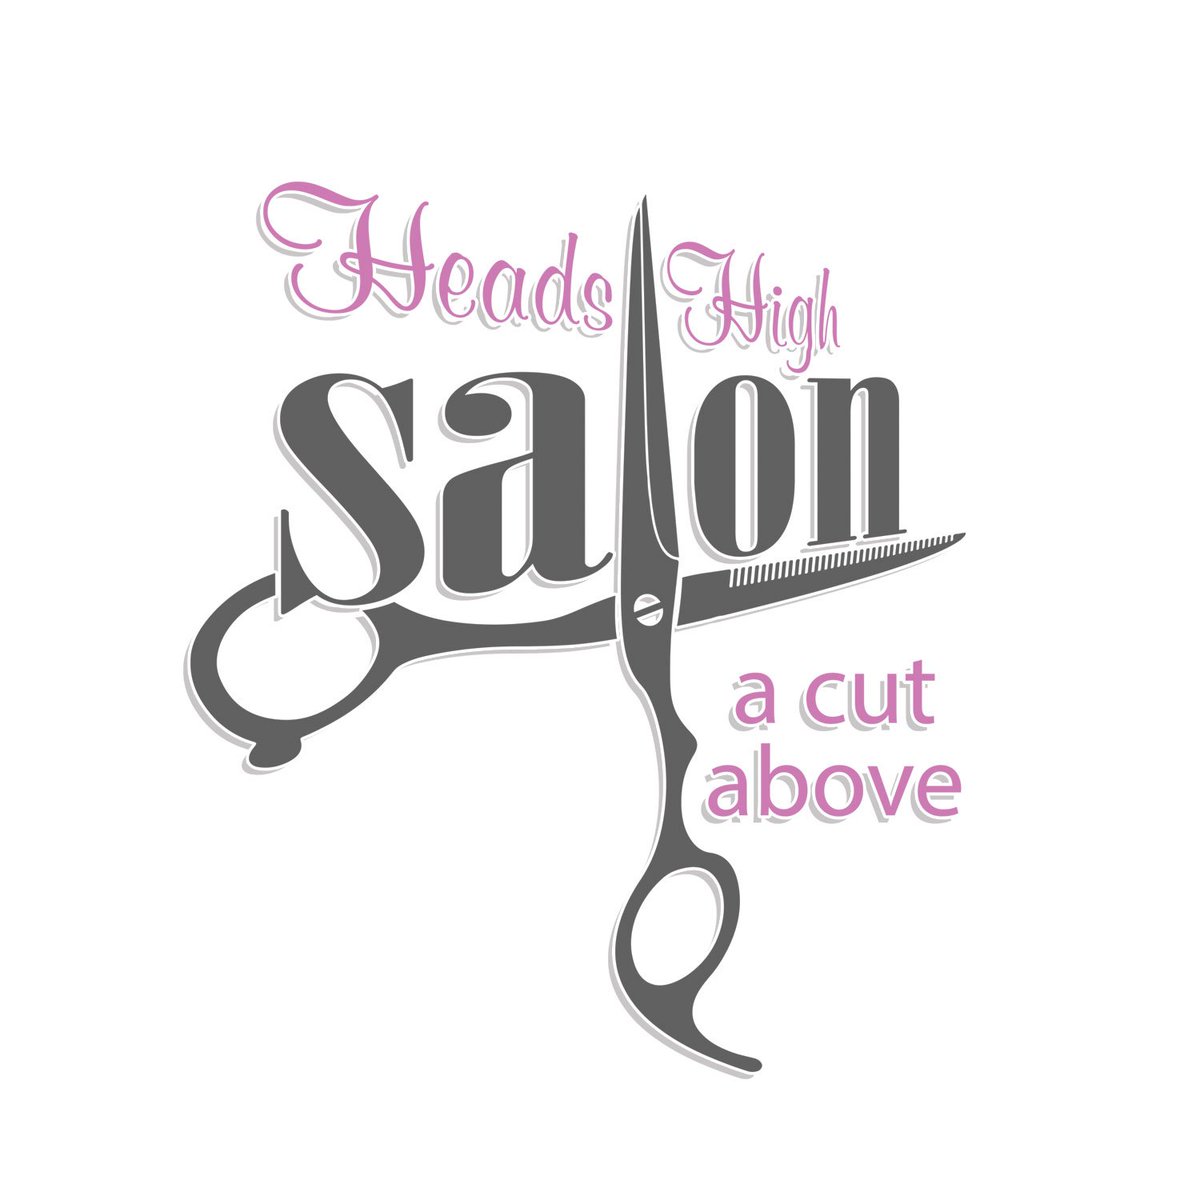 This is a logo design proposal that I made today for a hairdressing salon classgraphics.com #Logo #LogoDesign #GraphicDesign #Graphics #Hairdressing #HairSalon #BarberShop #HairStylist #WomensHair